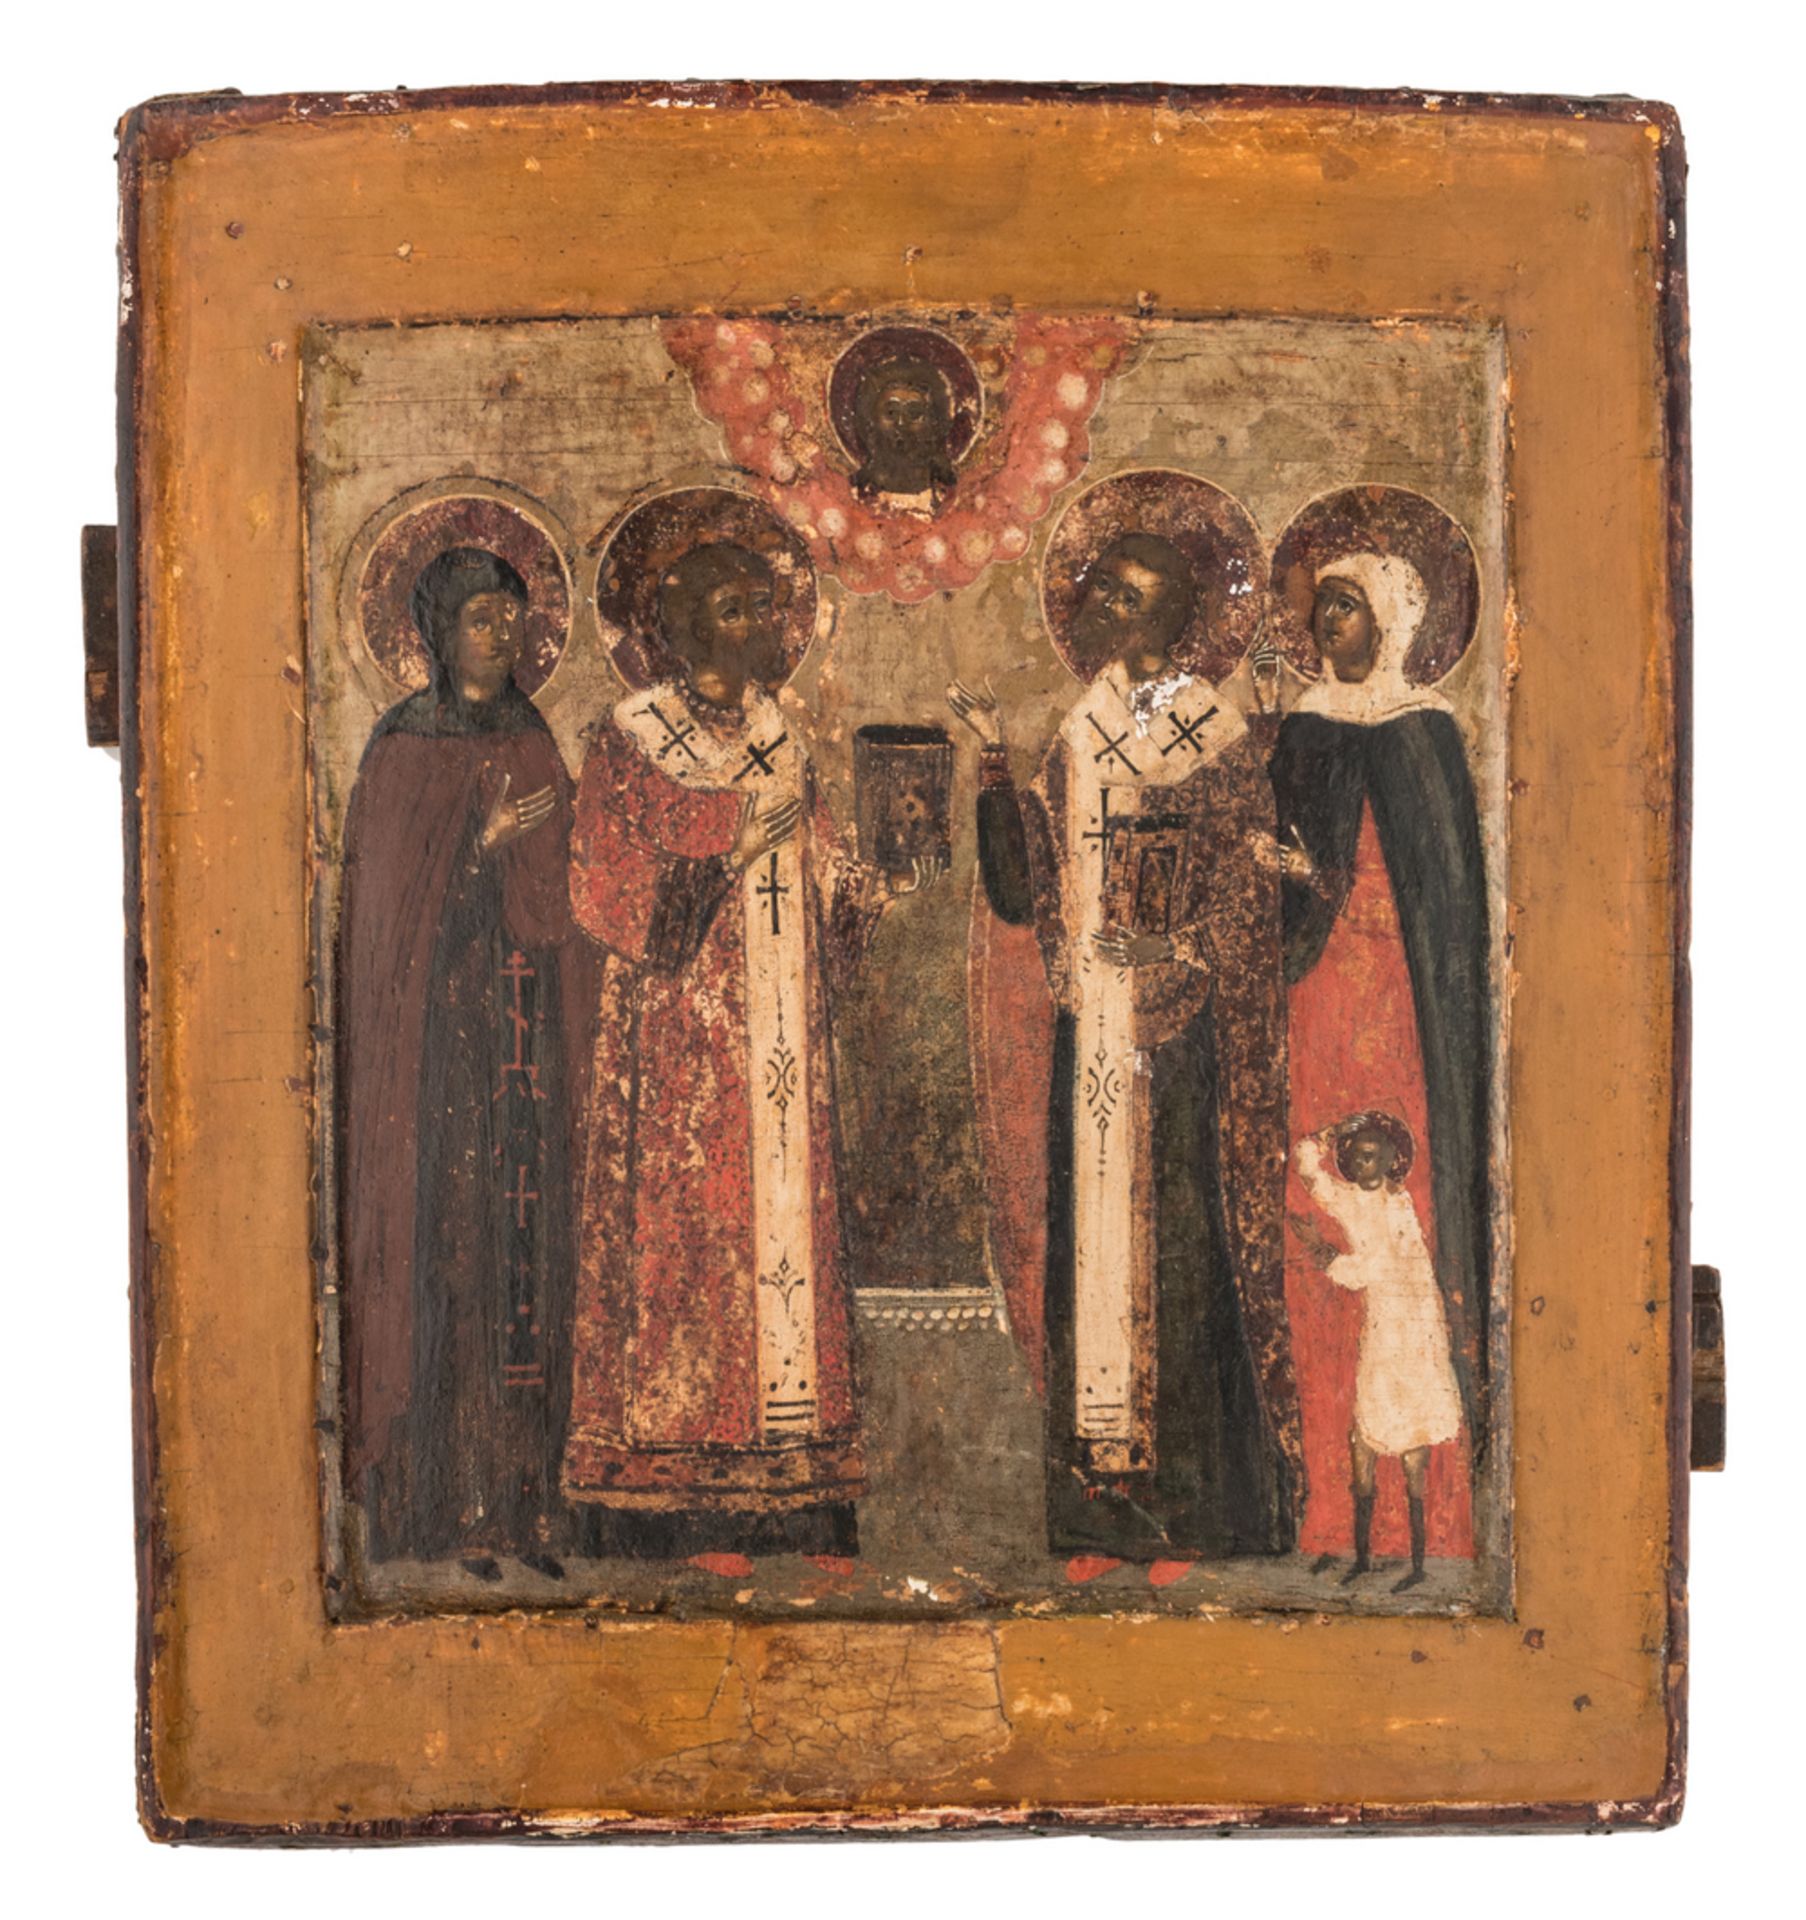 An 18thC East European icon depicting five saints, with accompanying documentation, 27 x 30 cm